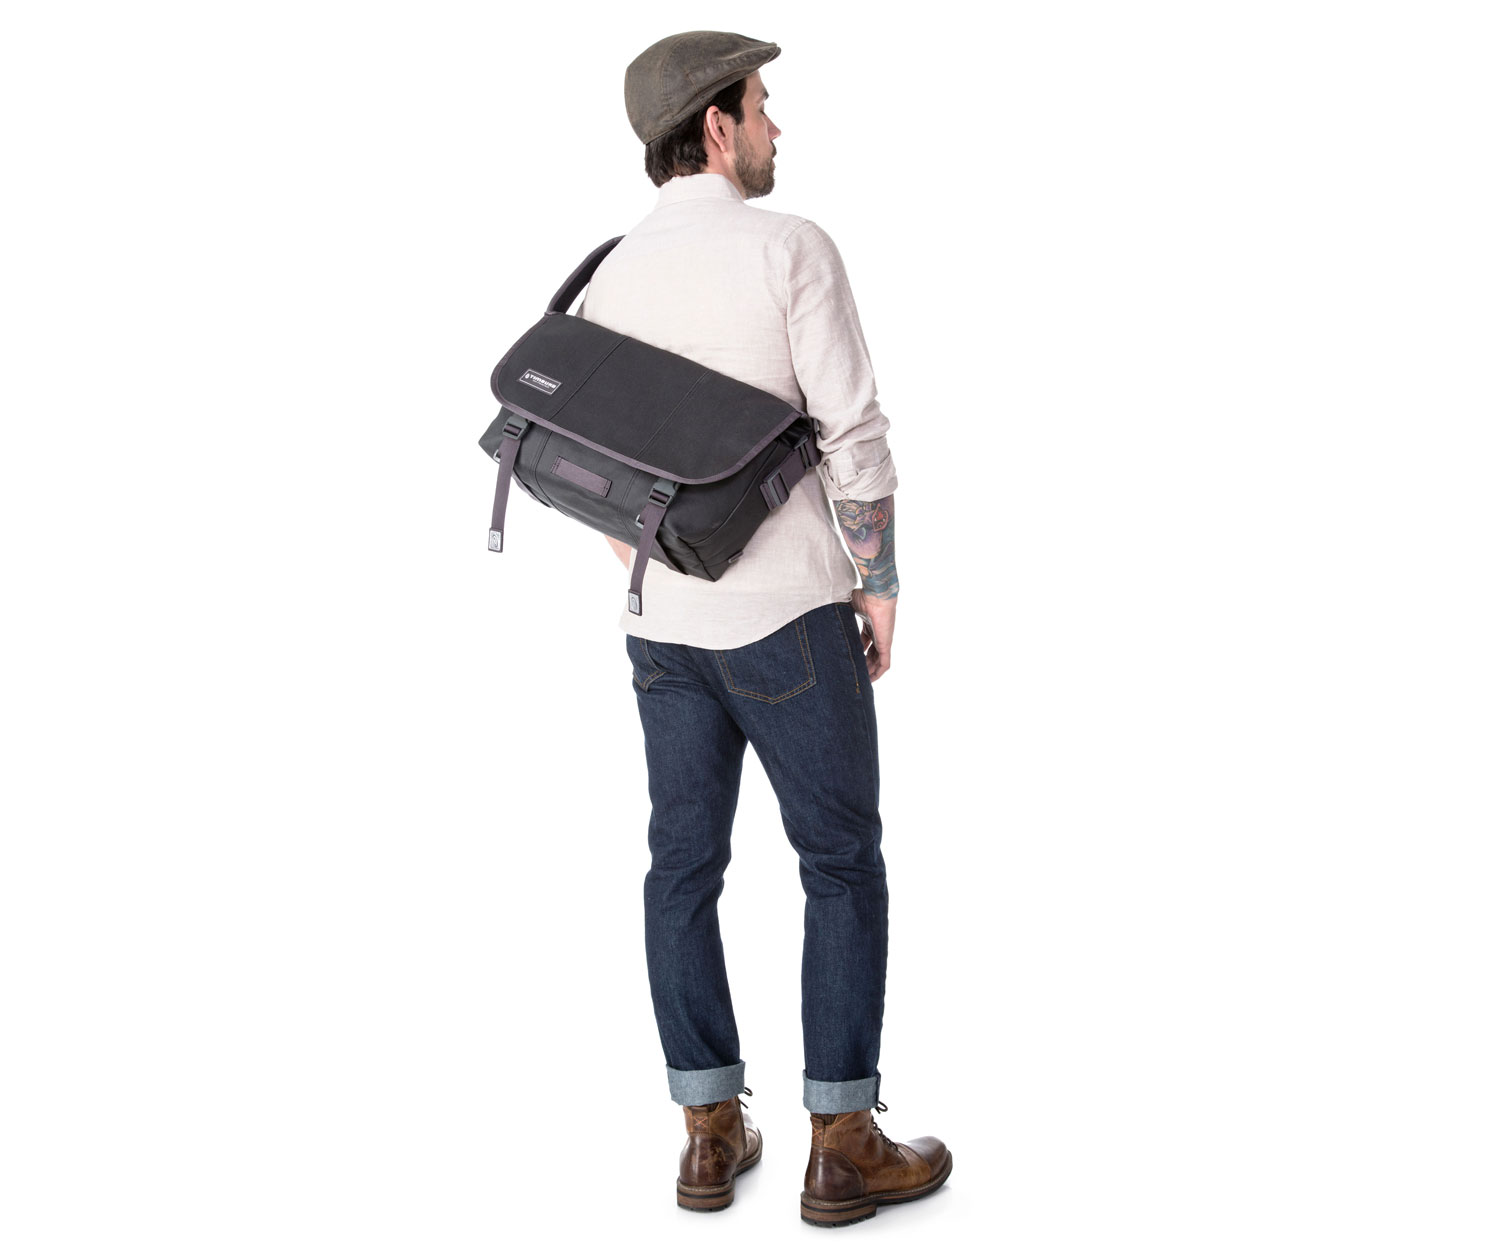 Thoughts on the Timbuk2 Custom Classic Messenger Bag